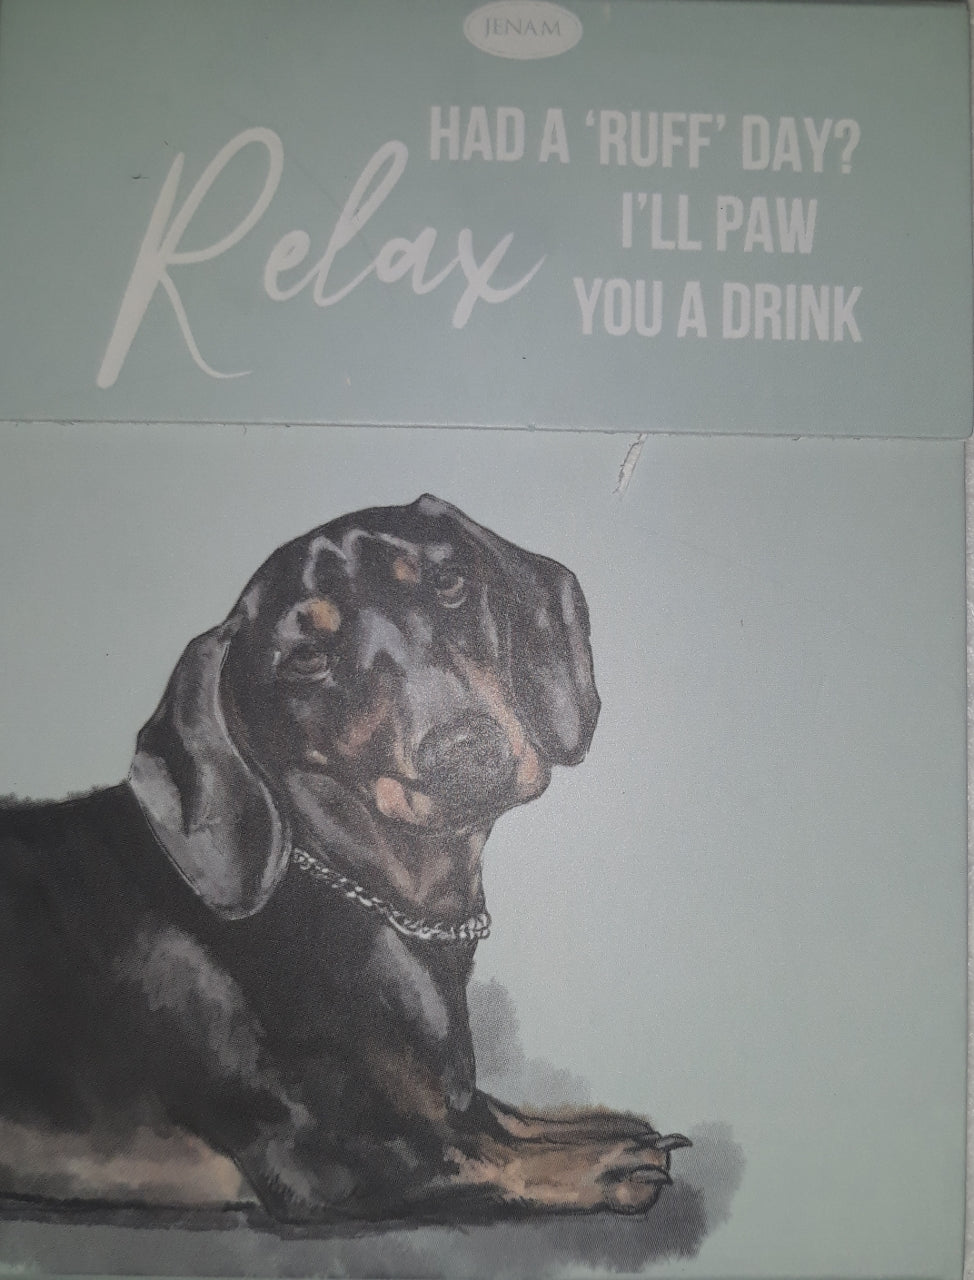 Paws for thought notepad - I'll paw you a drink